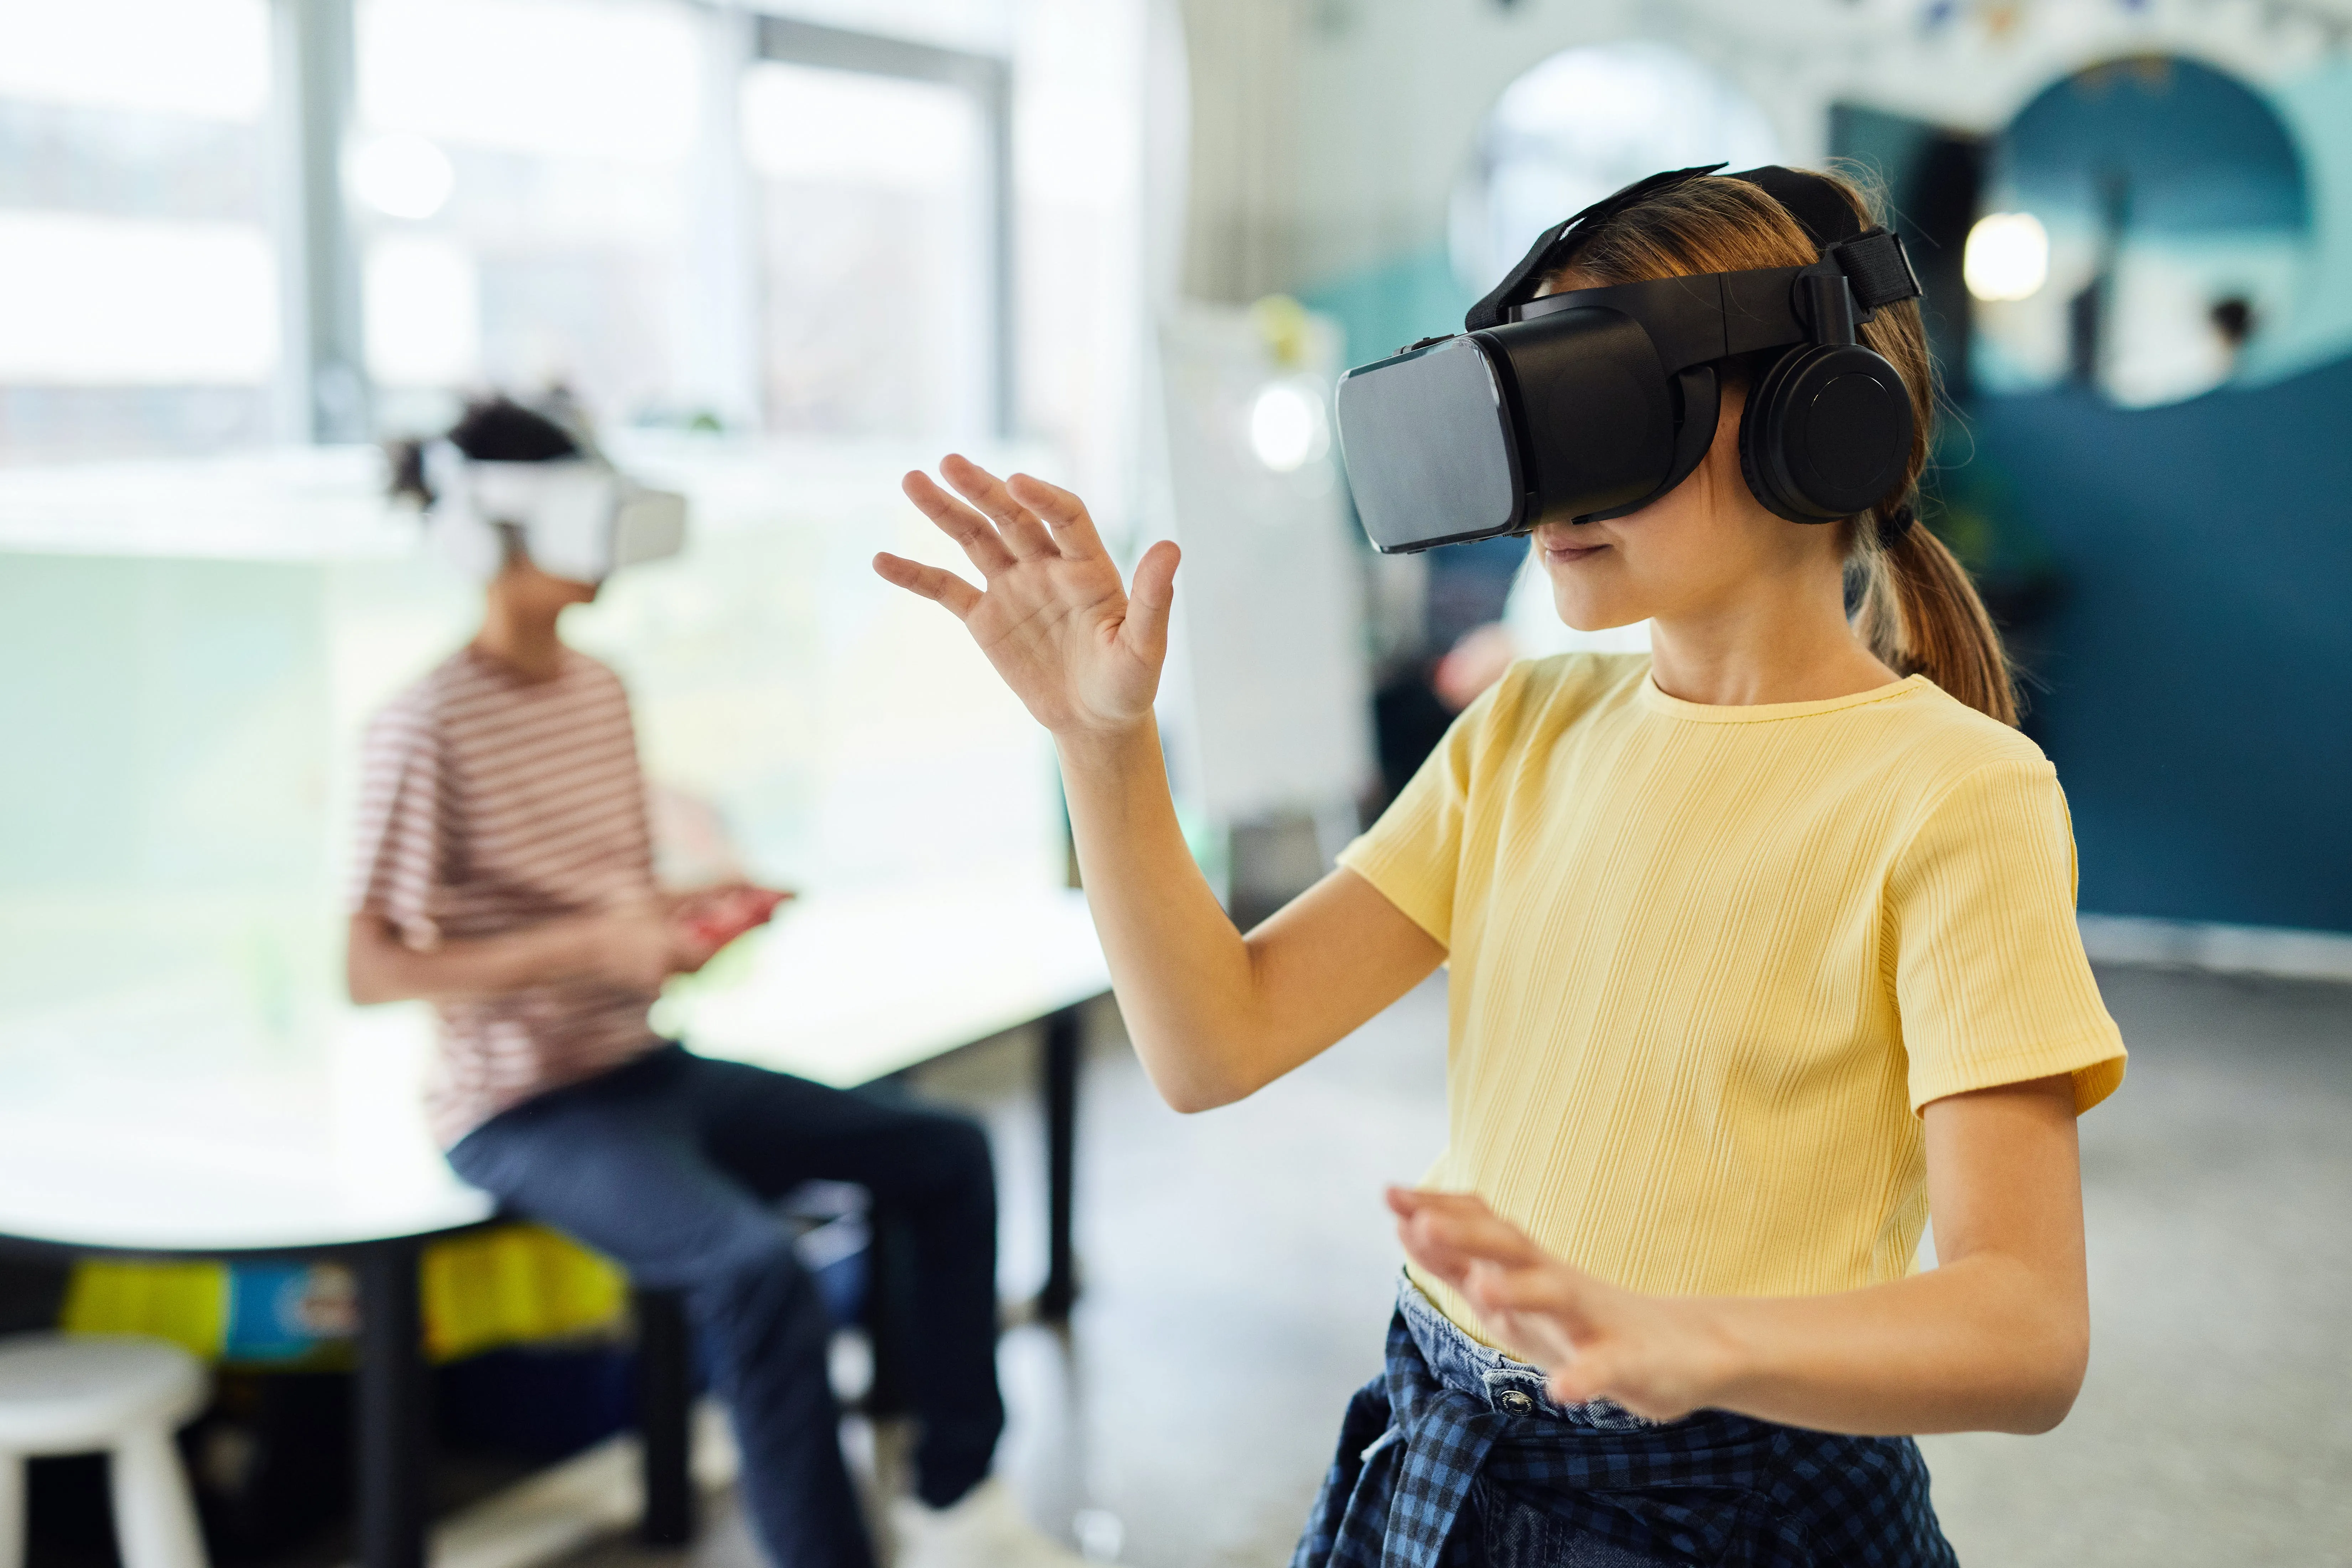 The Future of Mixed Reality in Entertainment